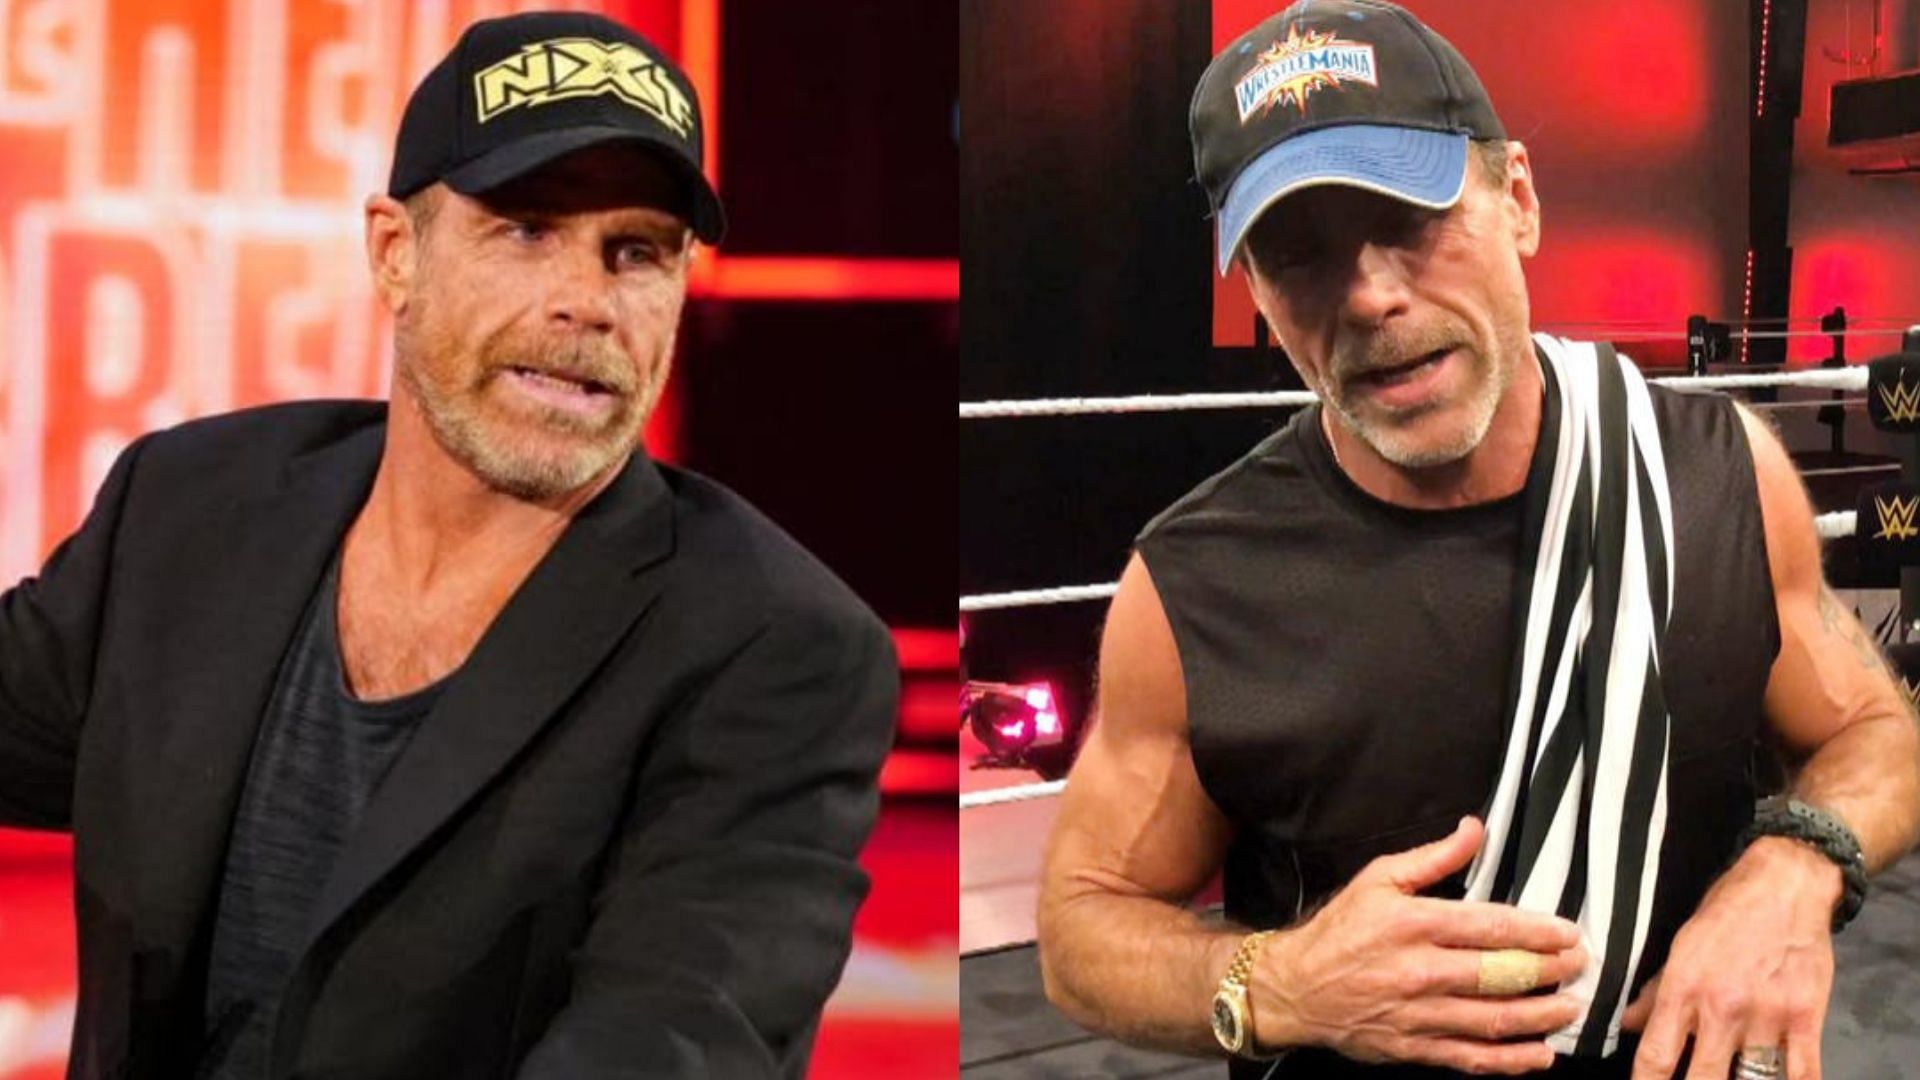 Shawn Michaels is currently in charge of WWE NXT.